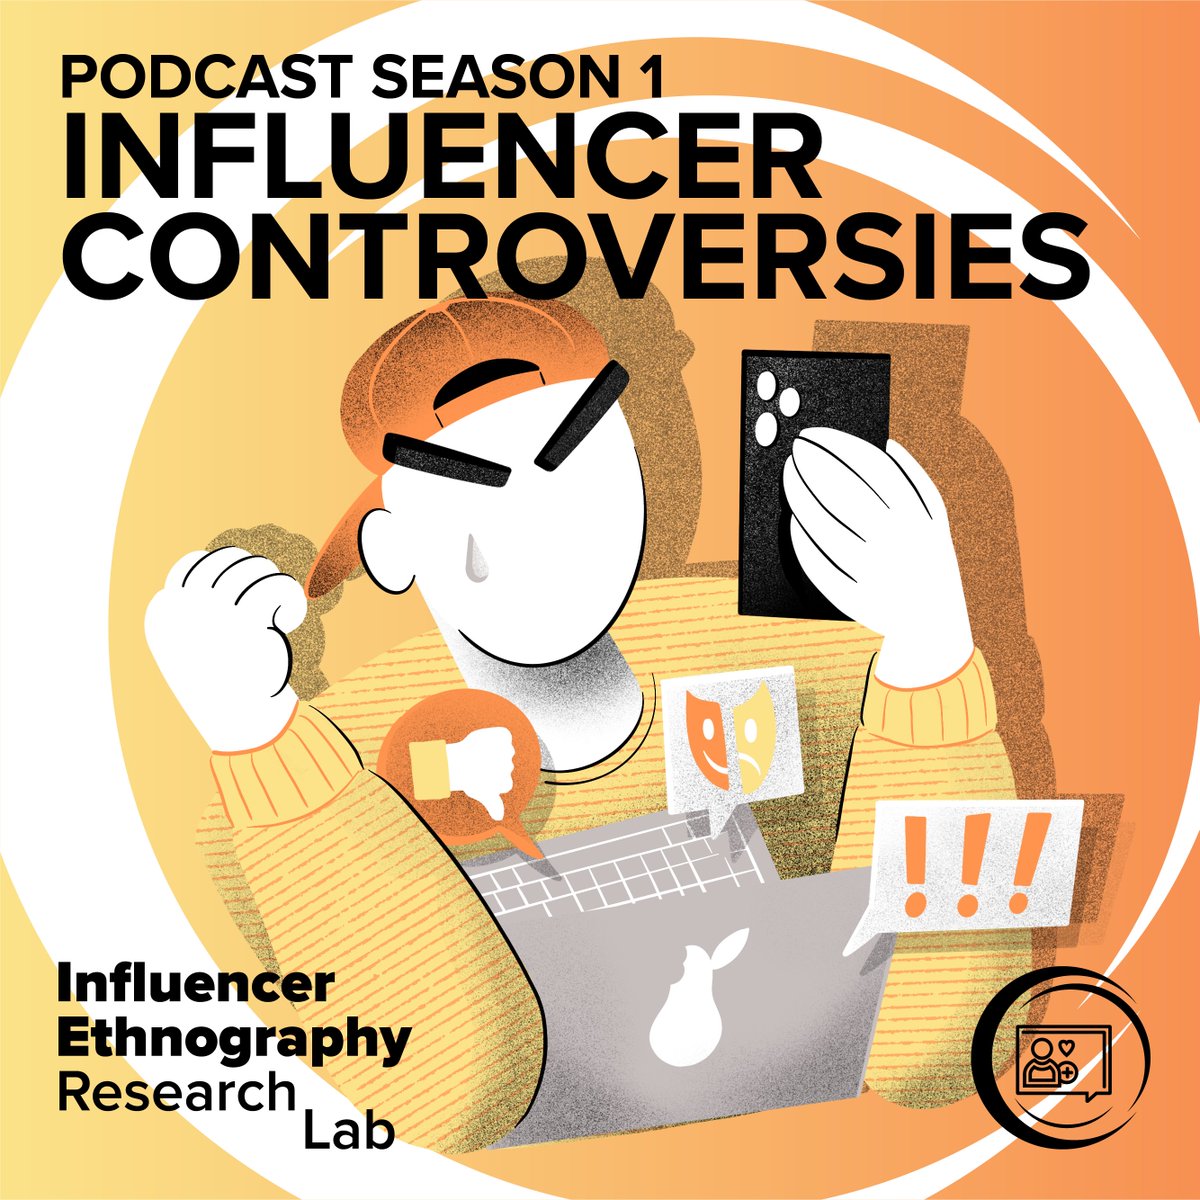 We are super excited to begin to present Season 1 of the IERLab Podcast to you! Episode 1 sees Professor Crystal Abidin (@wishcrys) sit down with host Walter Lee to chat about influencer controversies 🤳 Spotify 🎵 open.spotify.com/episode/2PDm7x… (also avaliable on our website)